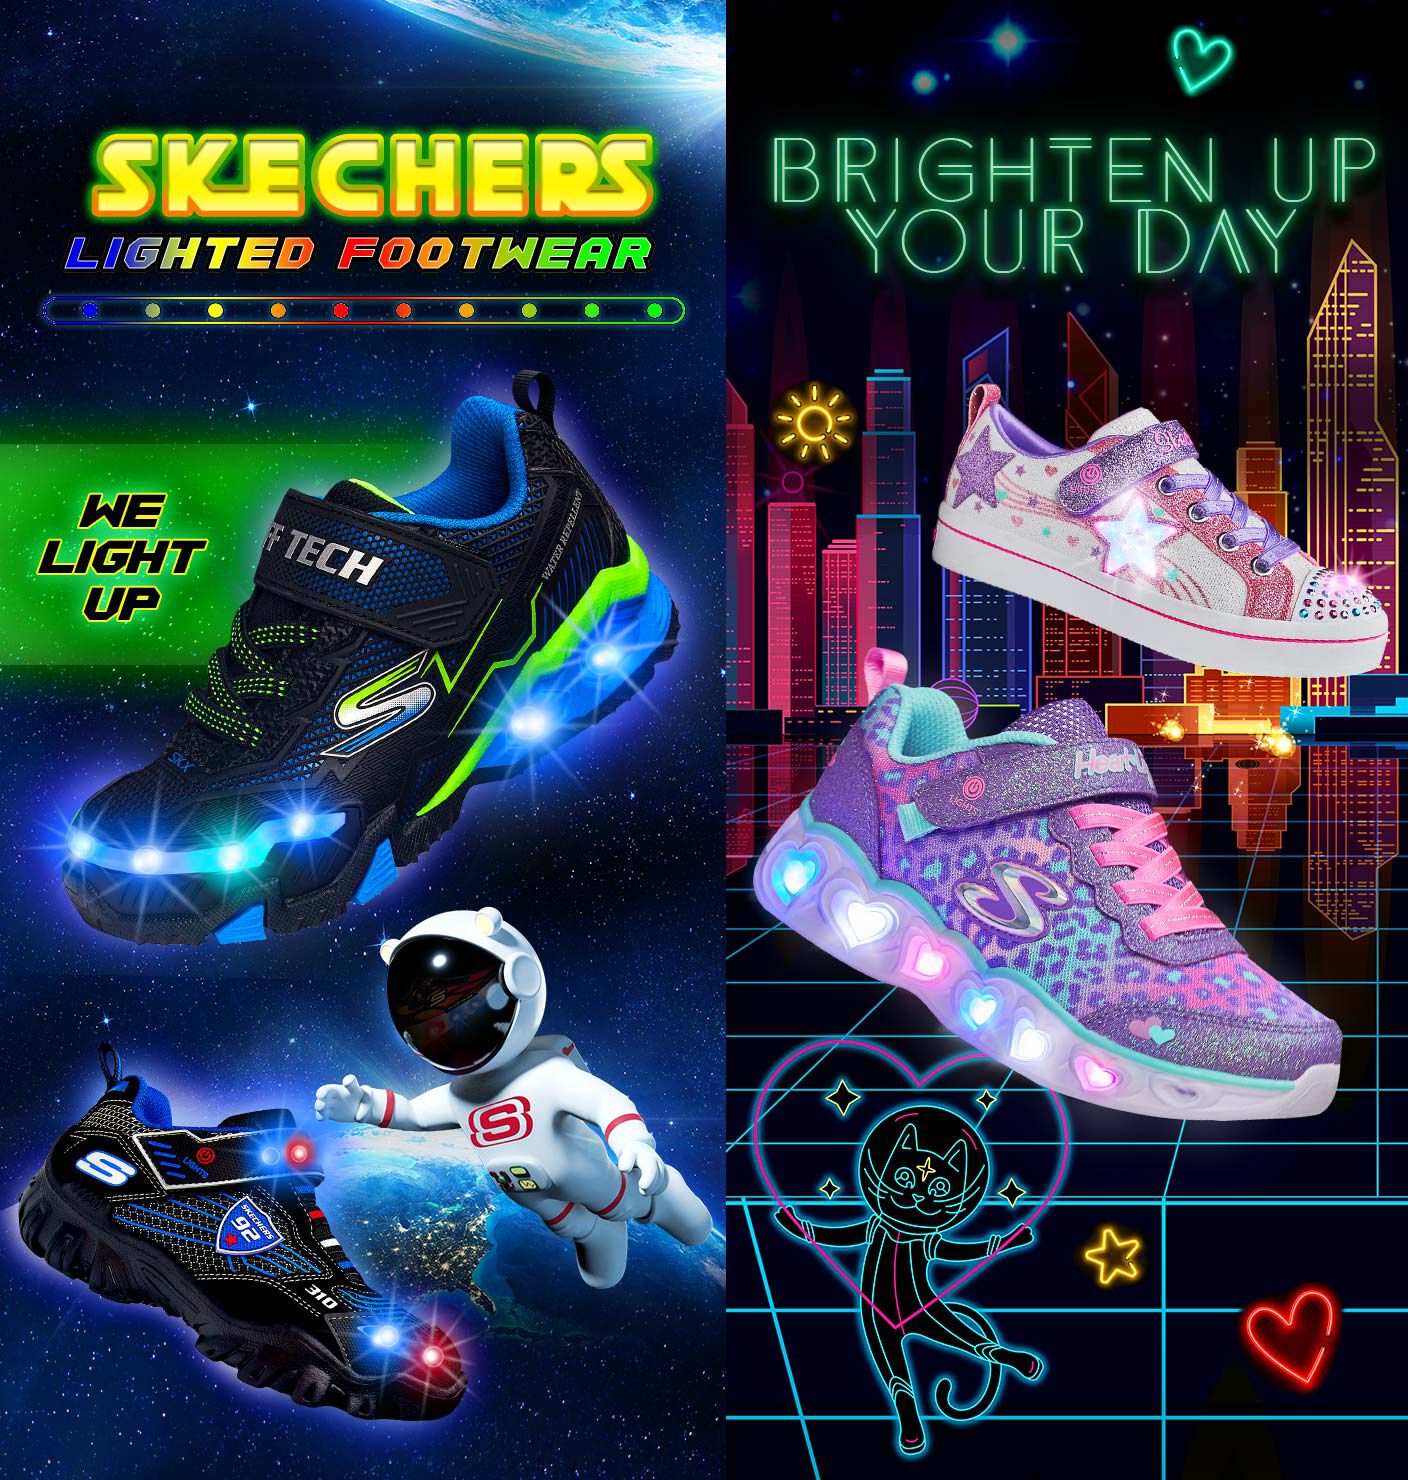 skechers safety shoes ireland